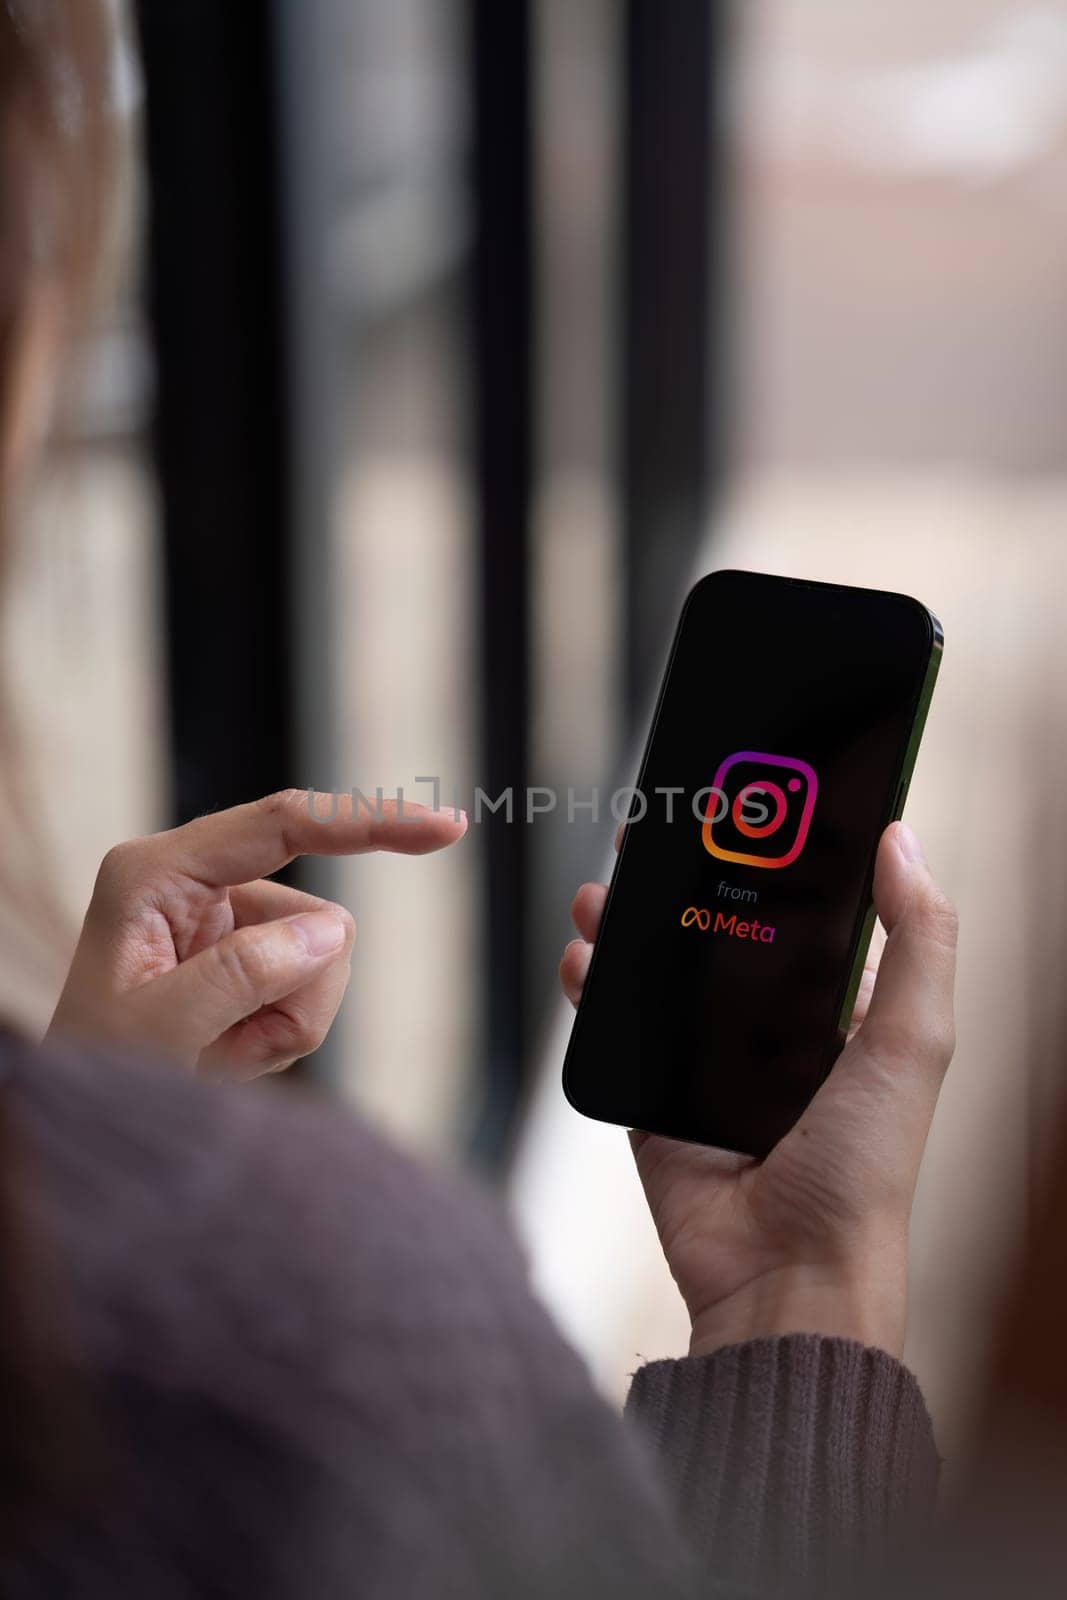 CHIANG MAI, THAILAND - AUG 08, 2023: A woman holds Apple iPhone 14 Pro Max with Instagram application on the screen at cafe. Instagram is a photo-sharing app for smartphones..